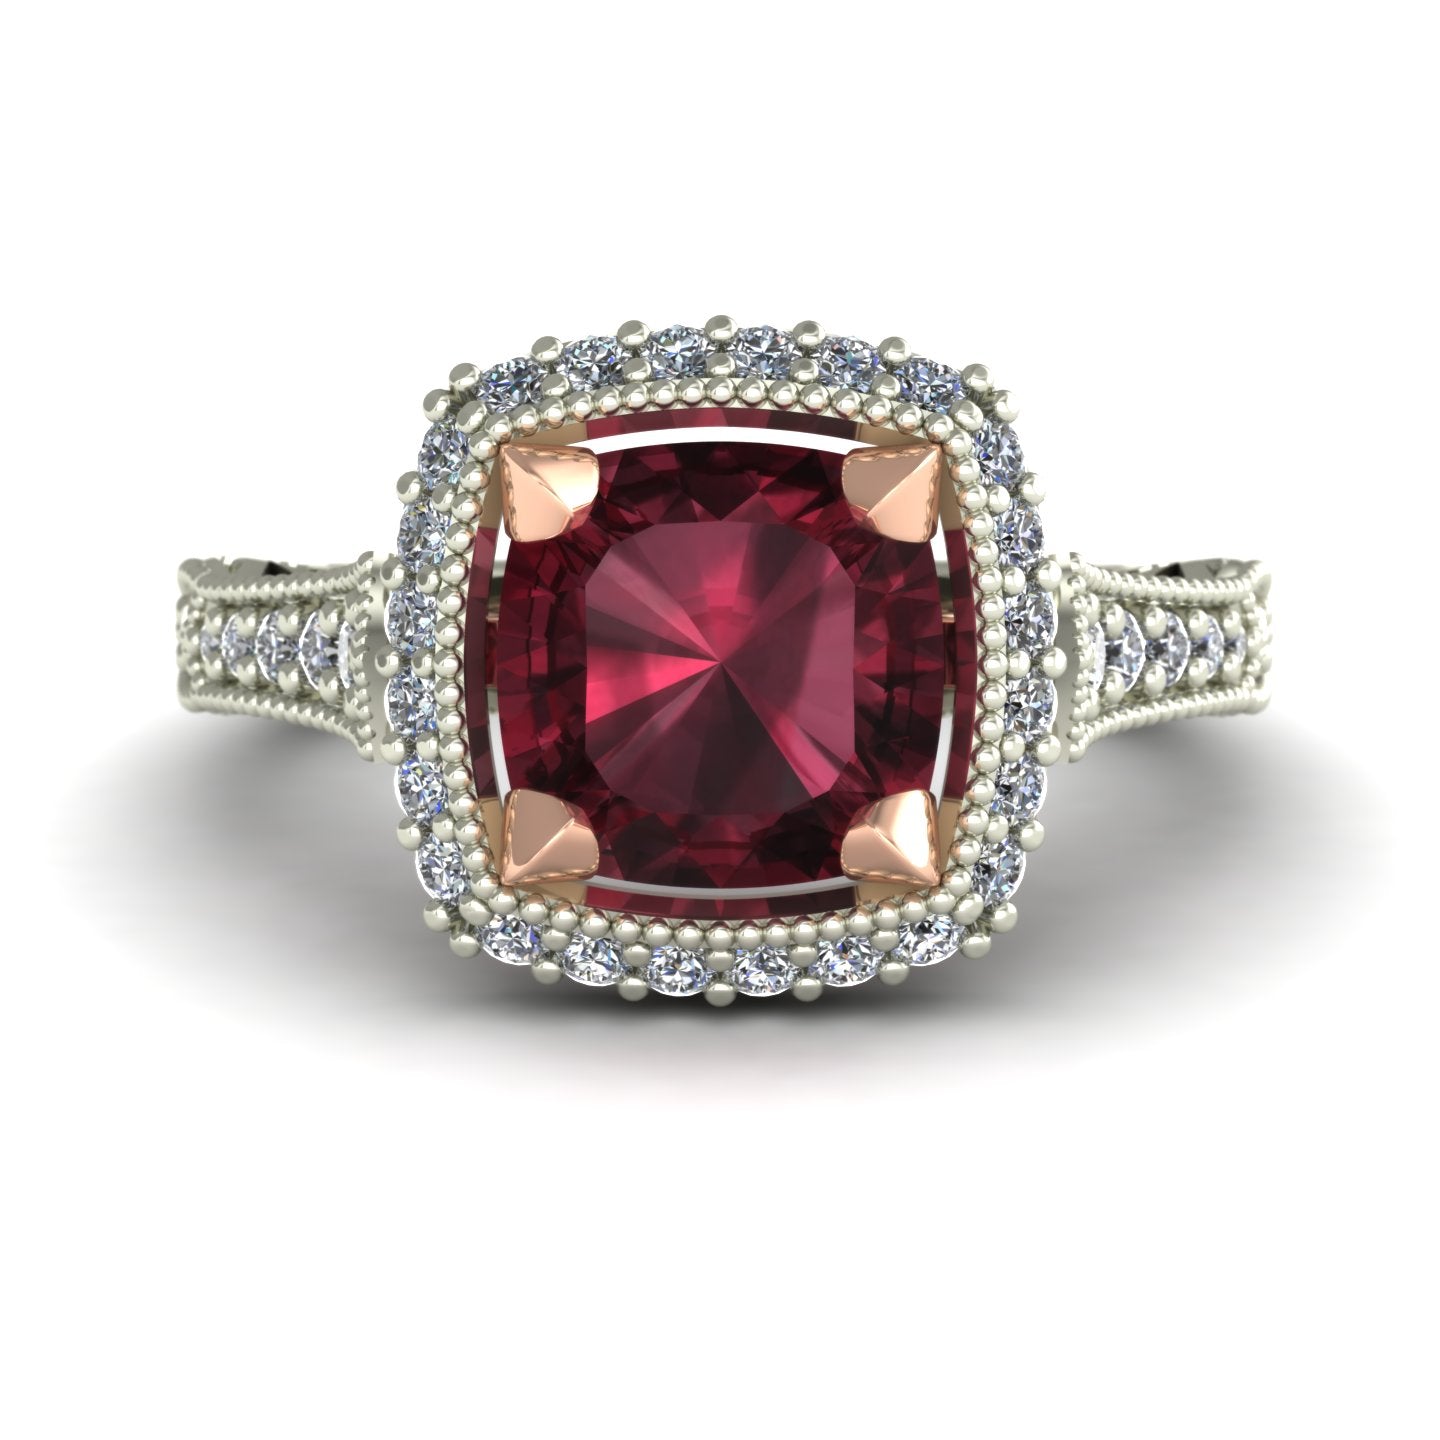 cushion cut rhodolite garnet and diamond halo two tone scroll ring in 14k rose and white gold - Charles Babb Designs - top view